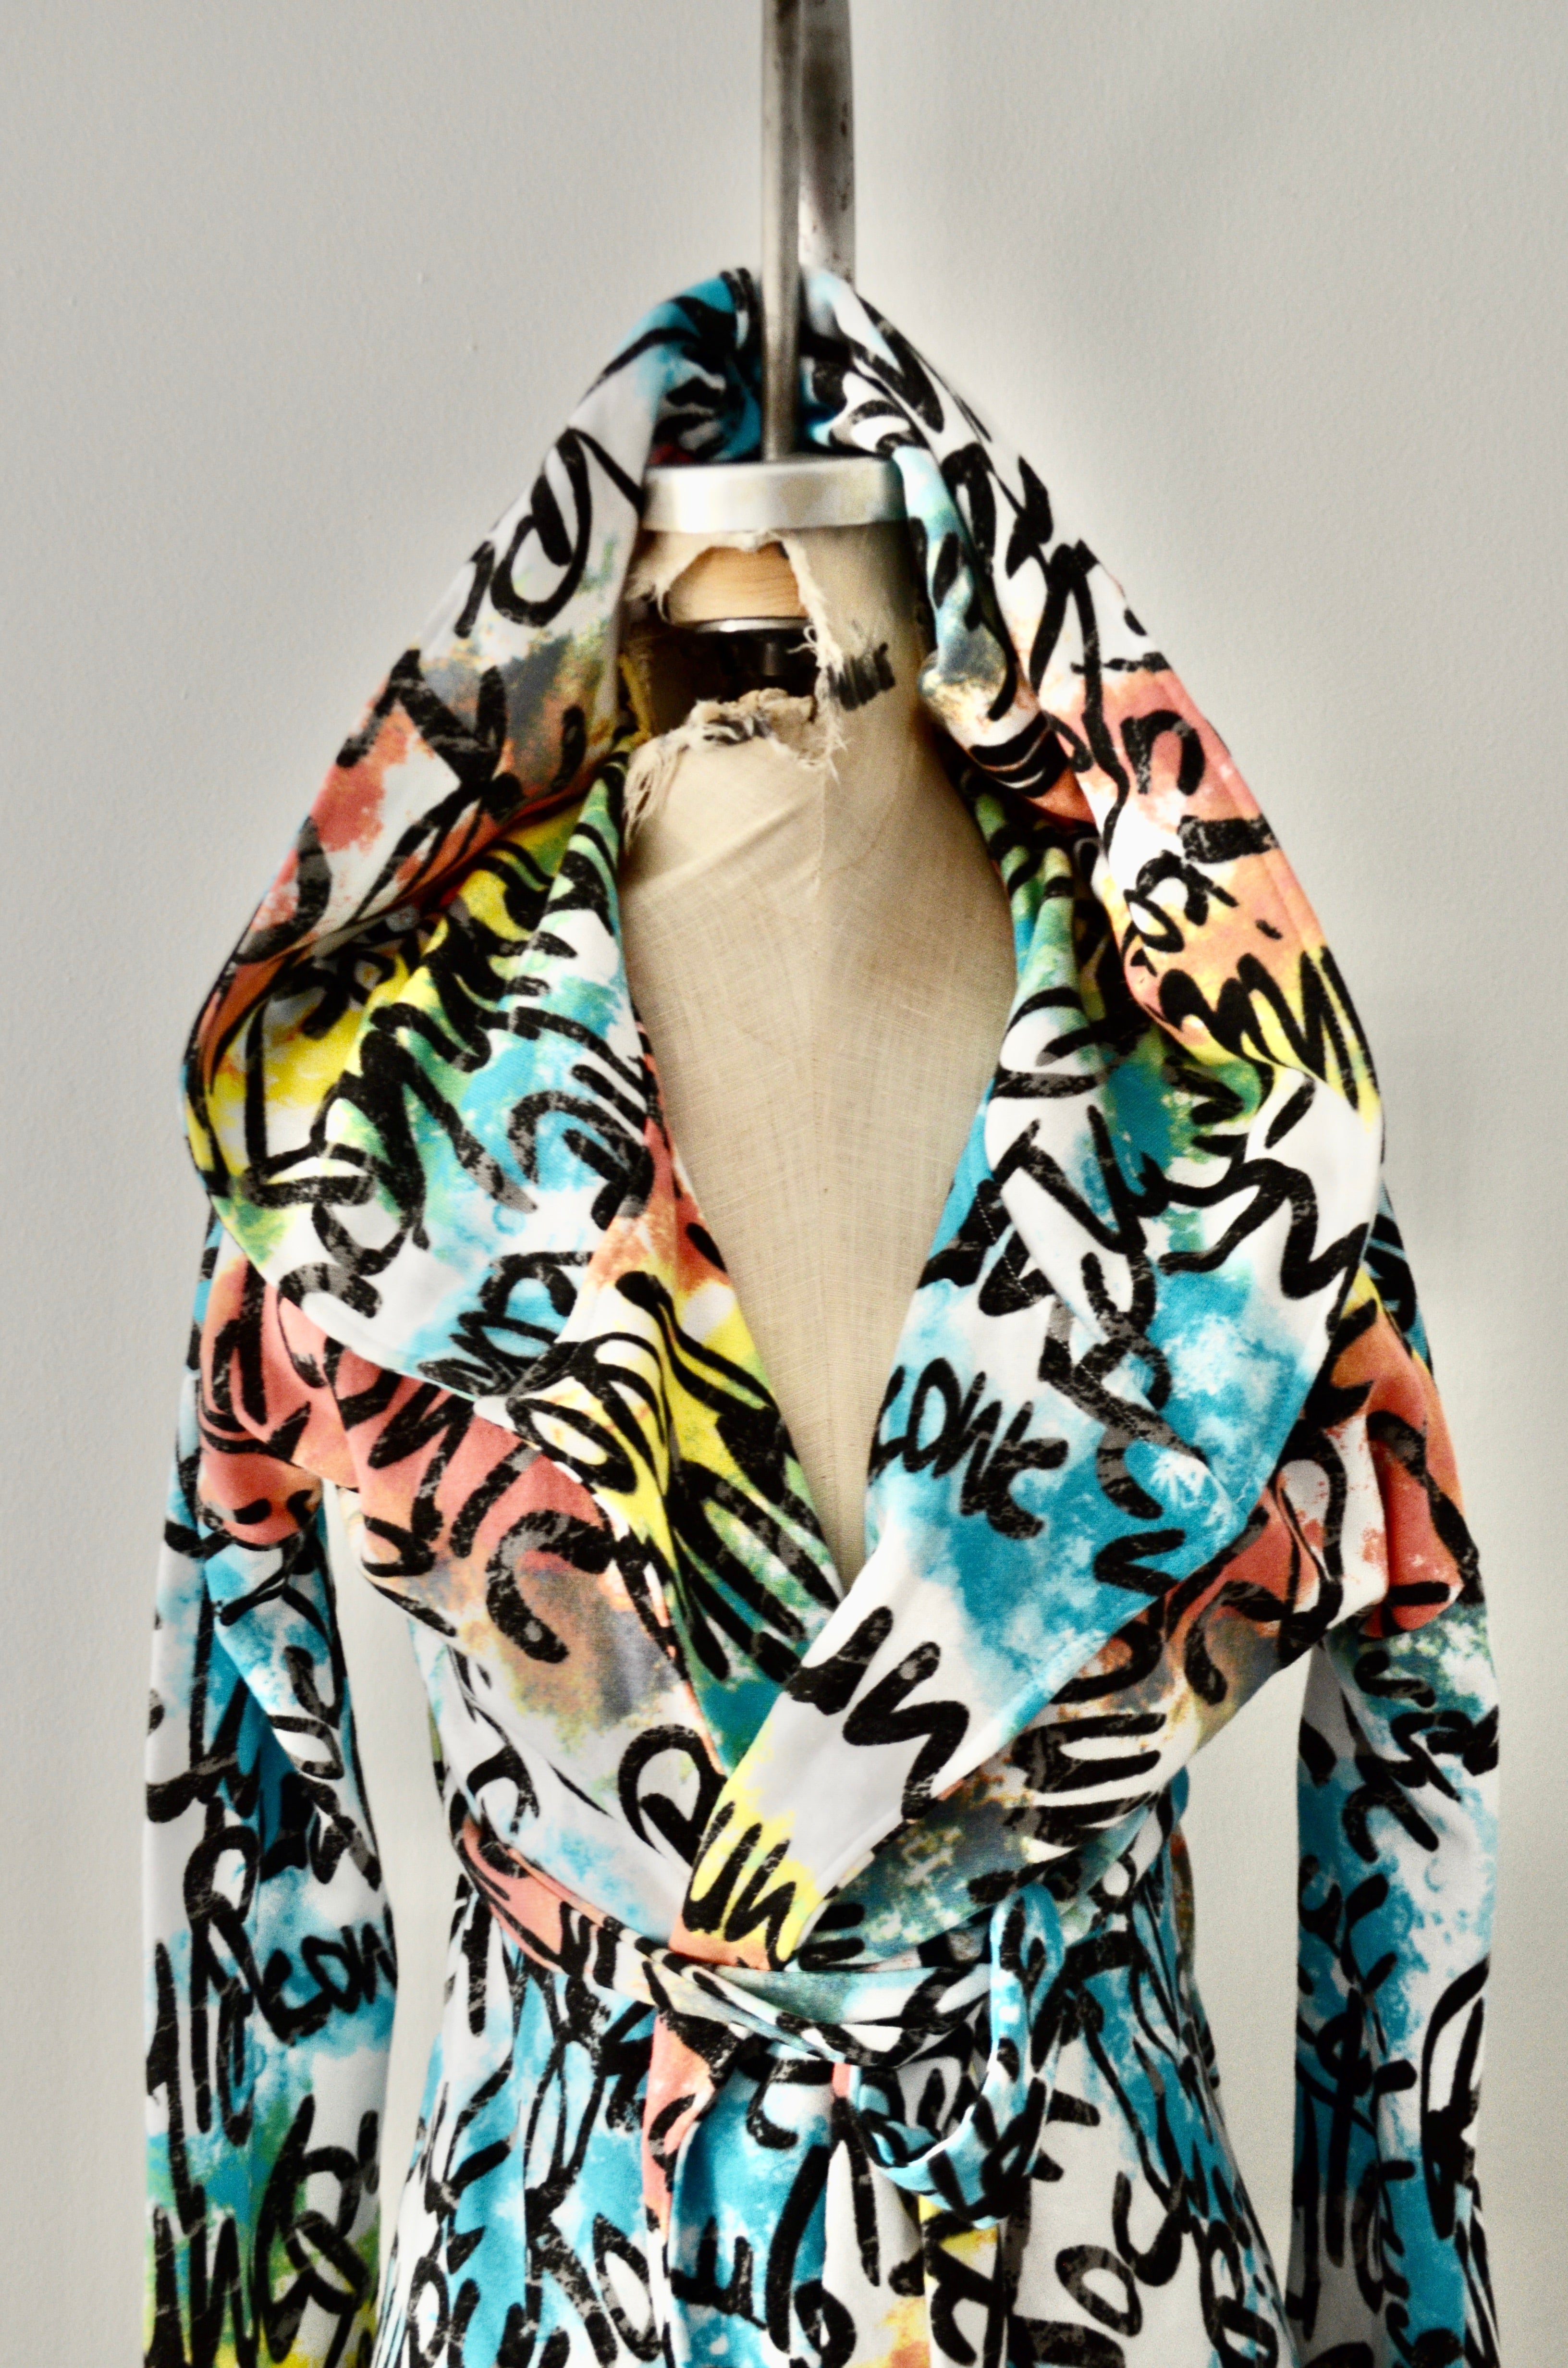 NWT Sobo Babe Tie Dye Cover Up Hooded Jacket Pullover Spring Fashion Collection